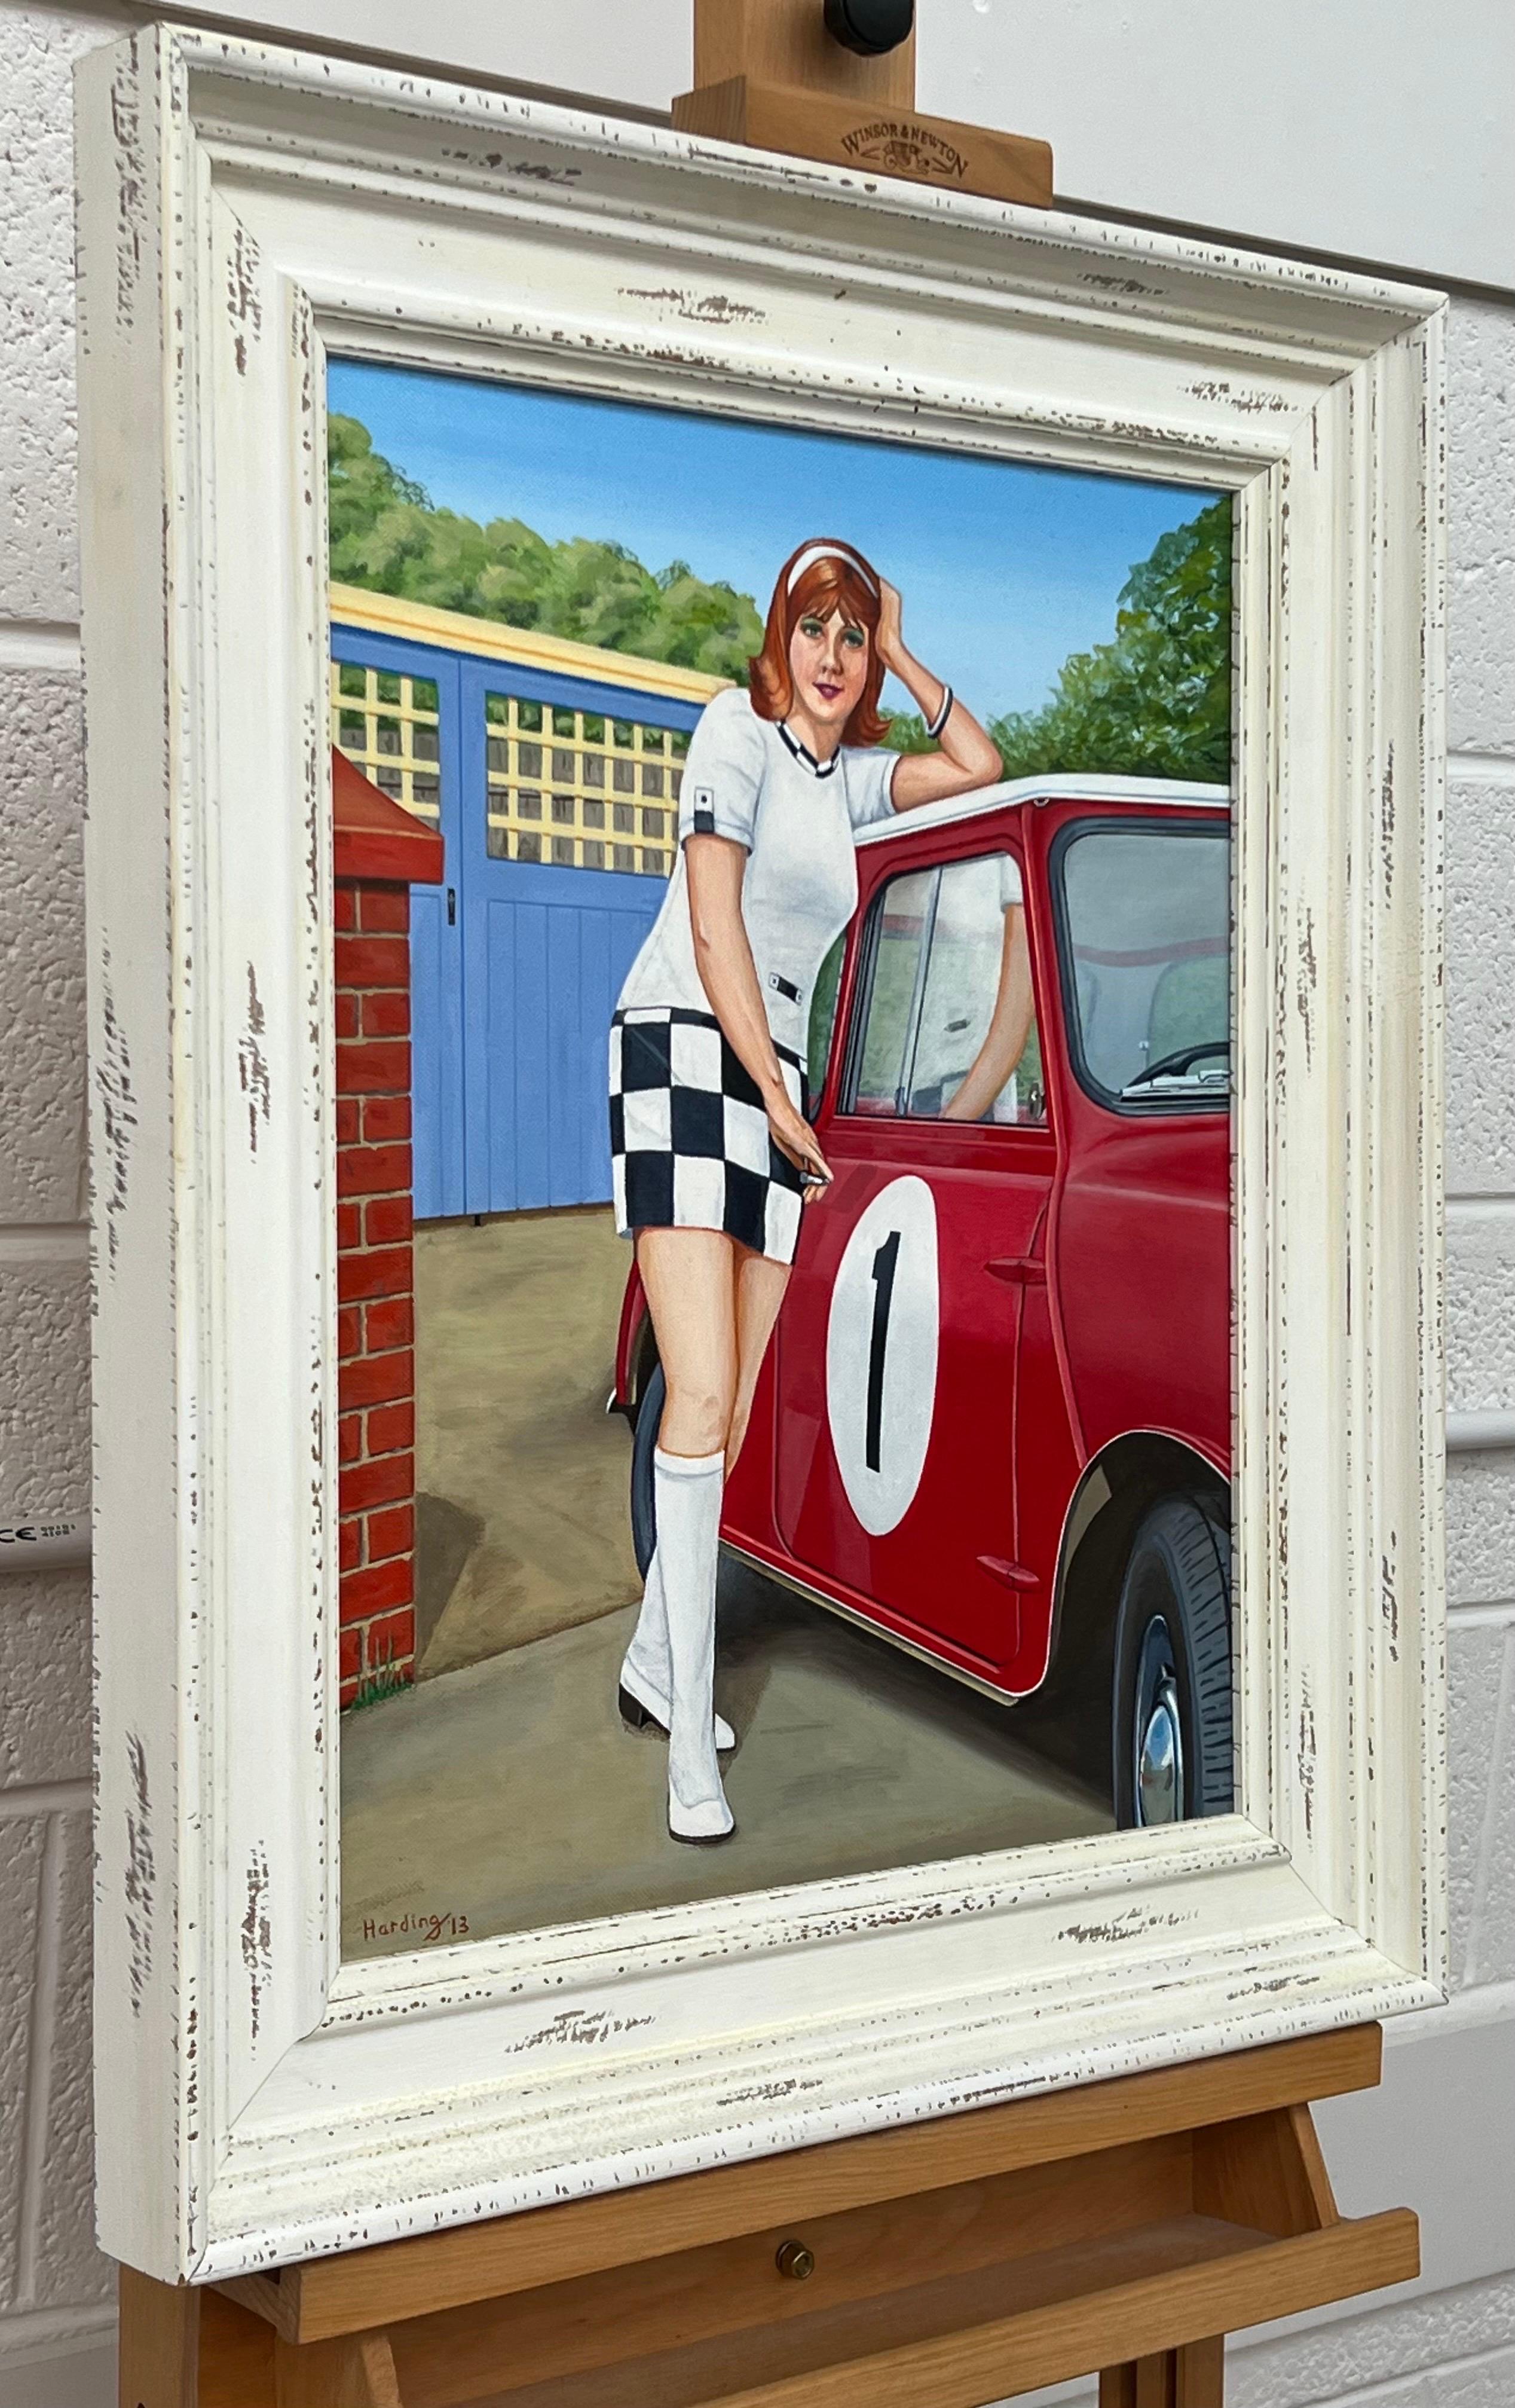 'A Racy Little Number’ a Woman with a Red Austin Mini Car in 1970's England - English School Painting by Paul F Harding